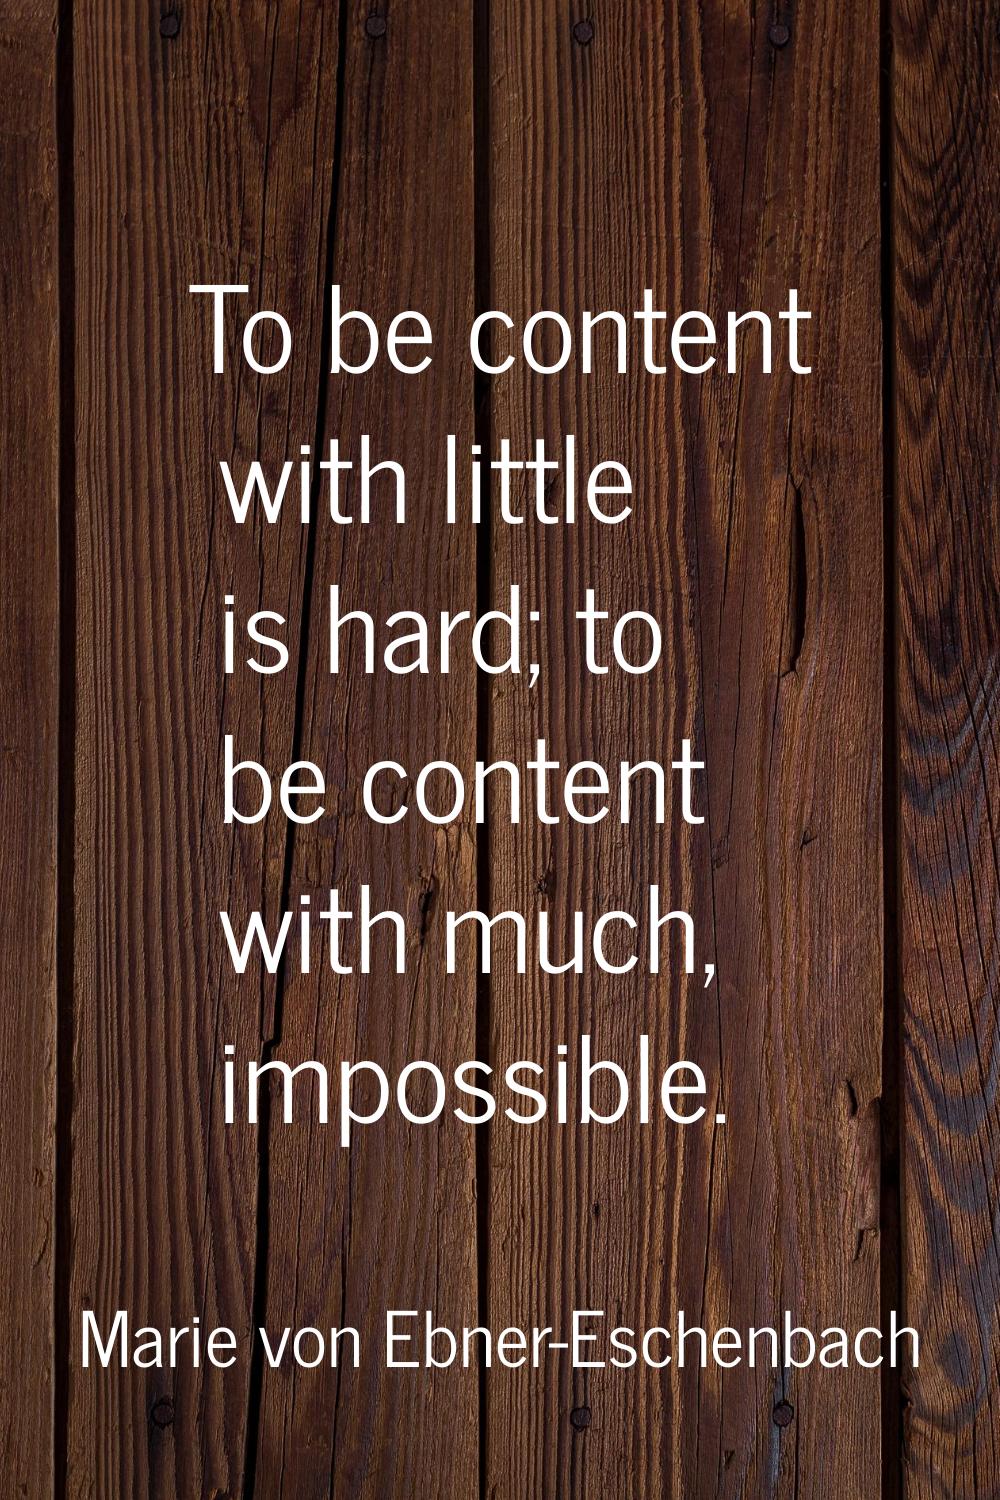 To be content with little is hard; to be content with much, impossible.